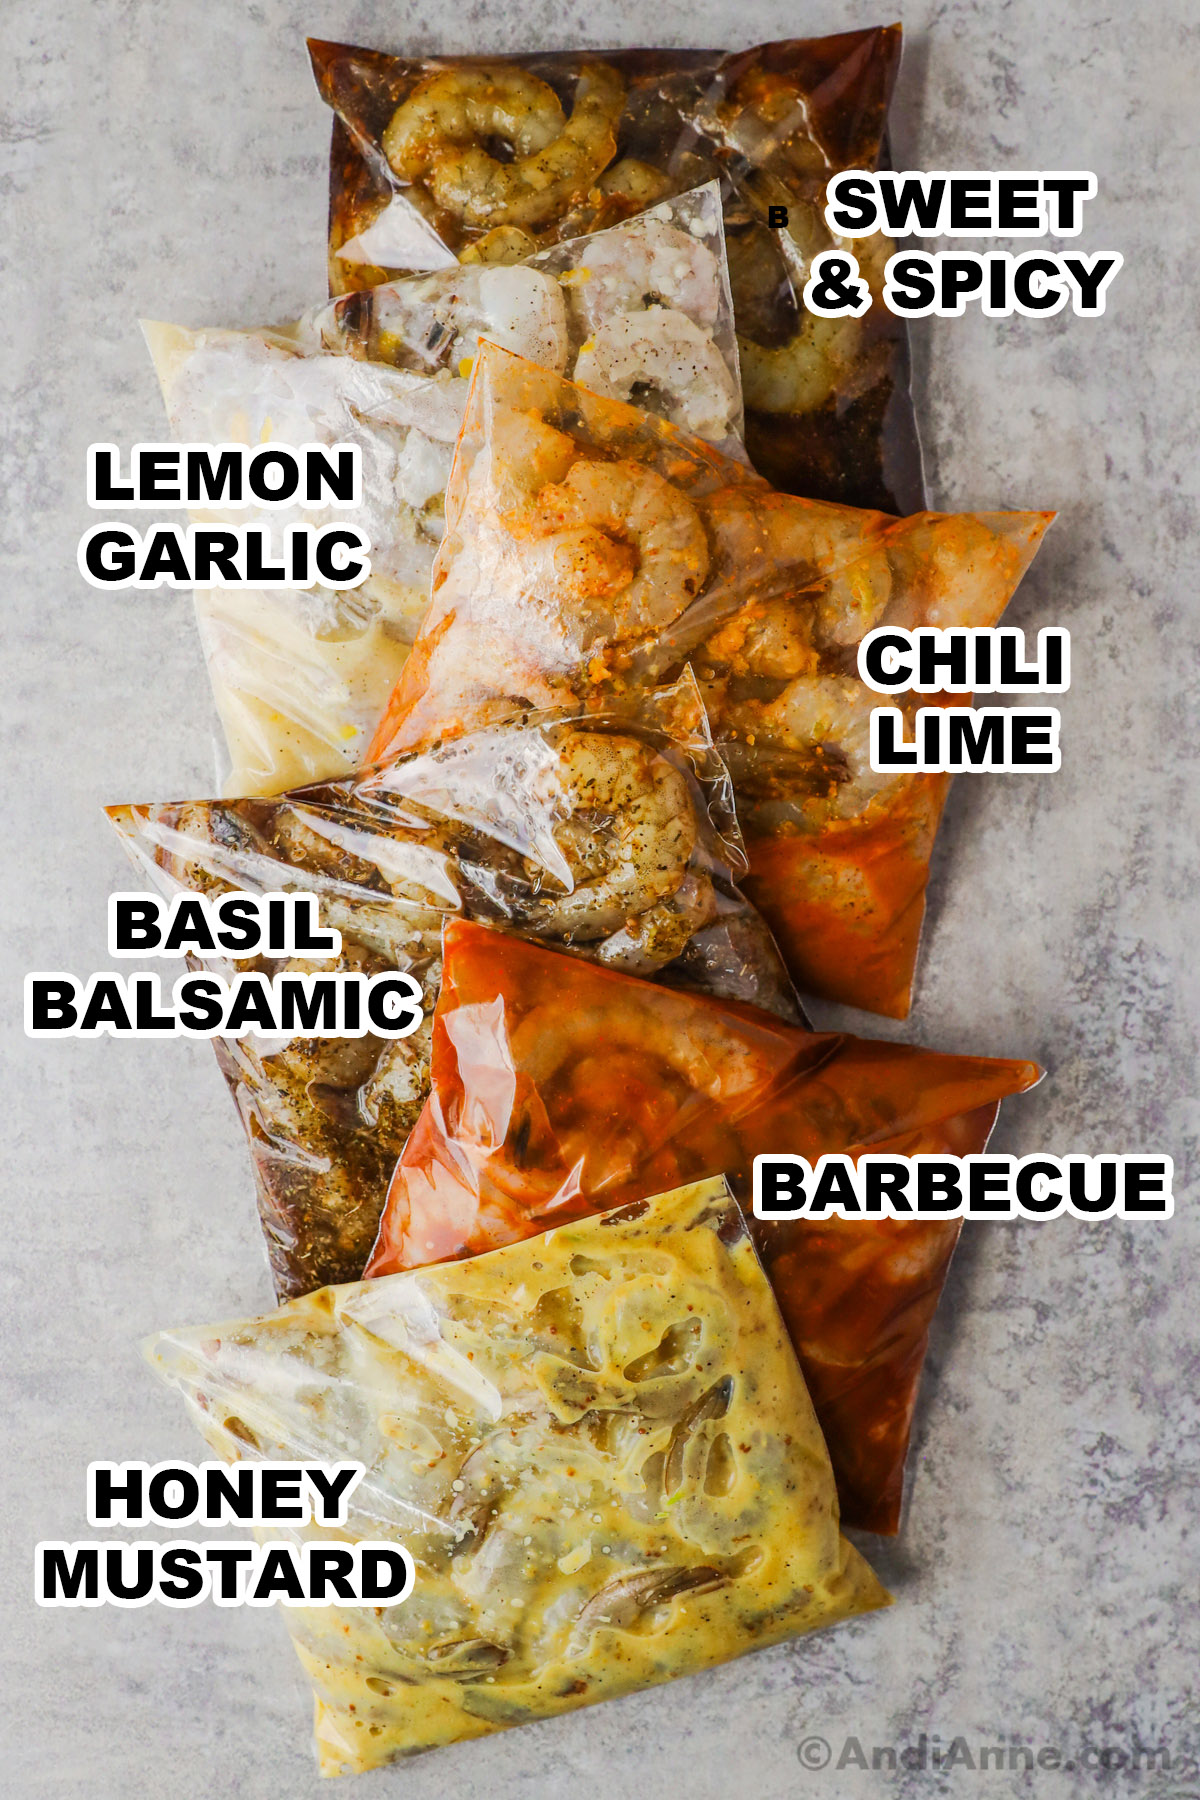 Six bags of raw shrimp with different sauces inside each including sweet and spicy marinade, lemon garlic, chili lime, basil balsamic, barbecue, and honey mustard.